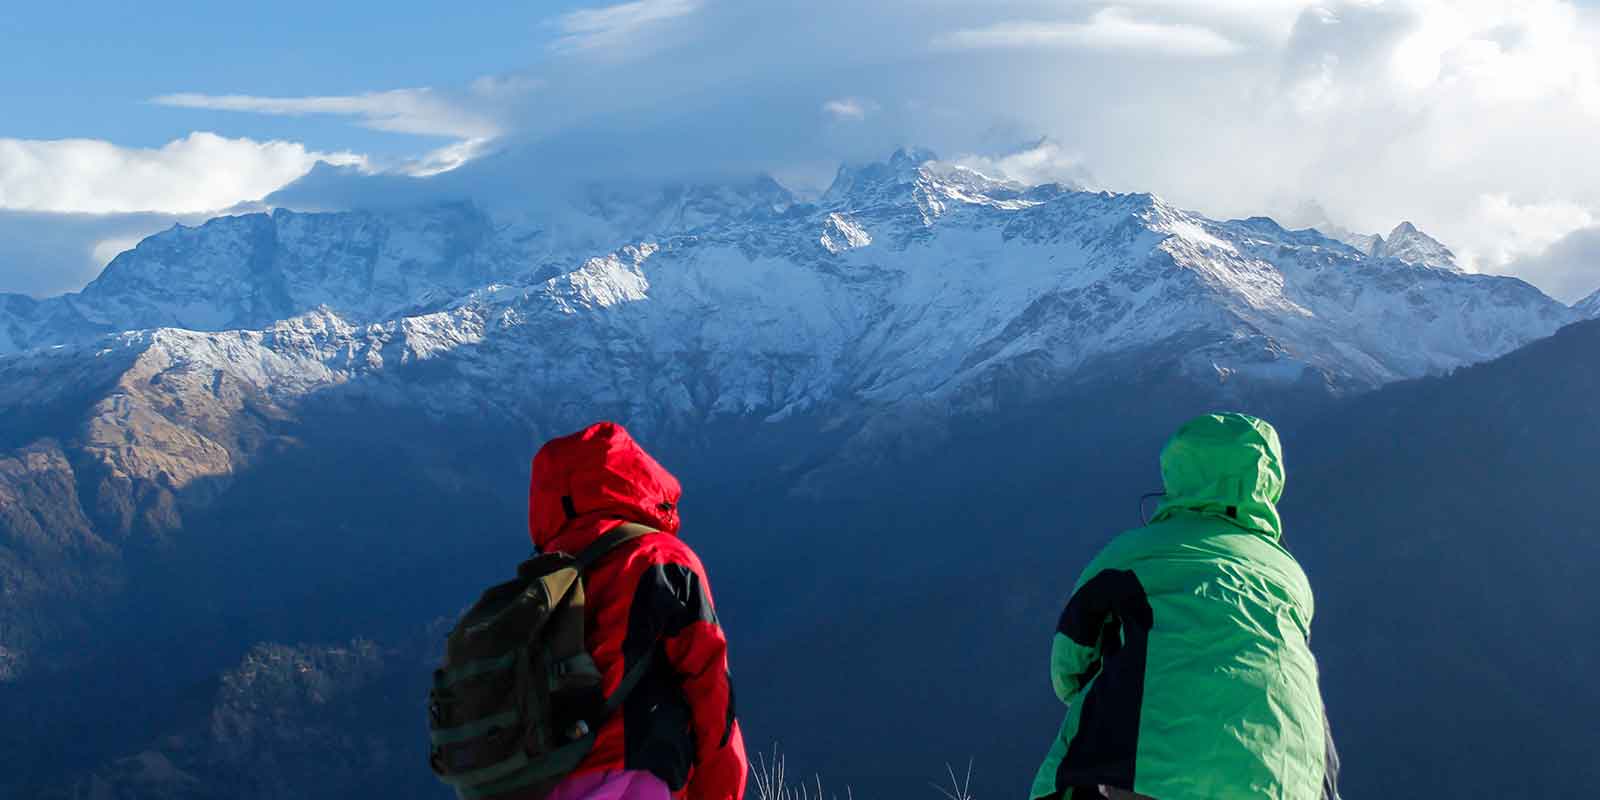 Two trekkers on summit of Poon Hill looking out to Annapurna range